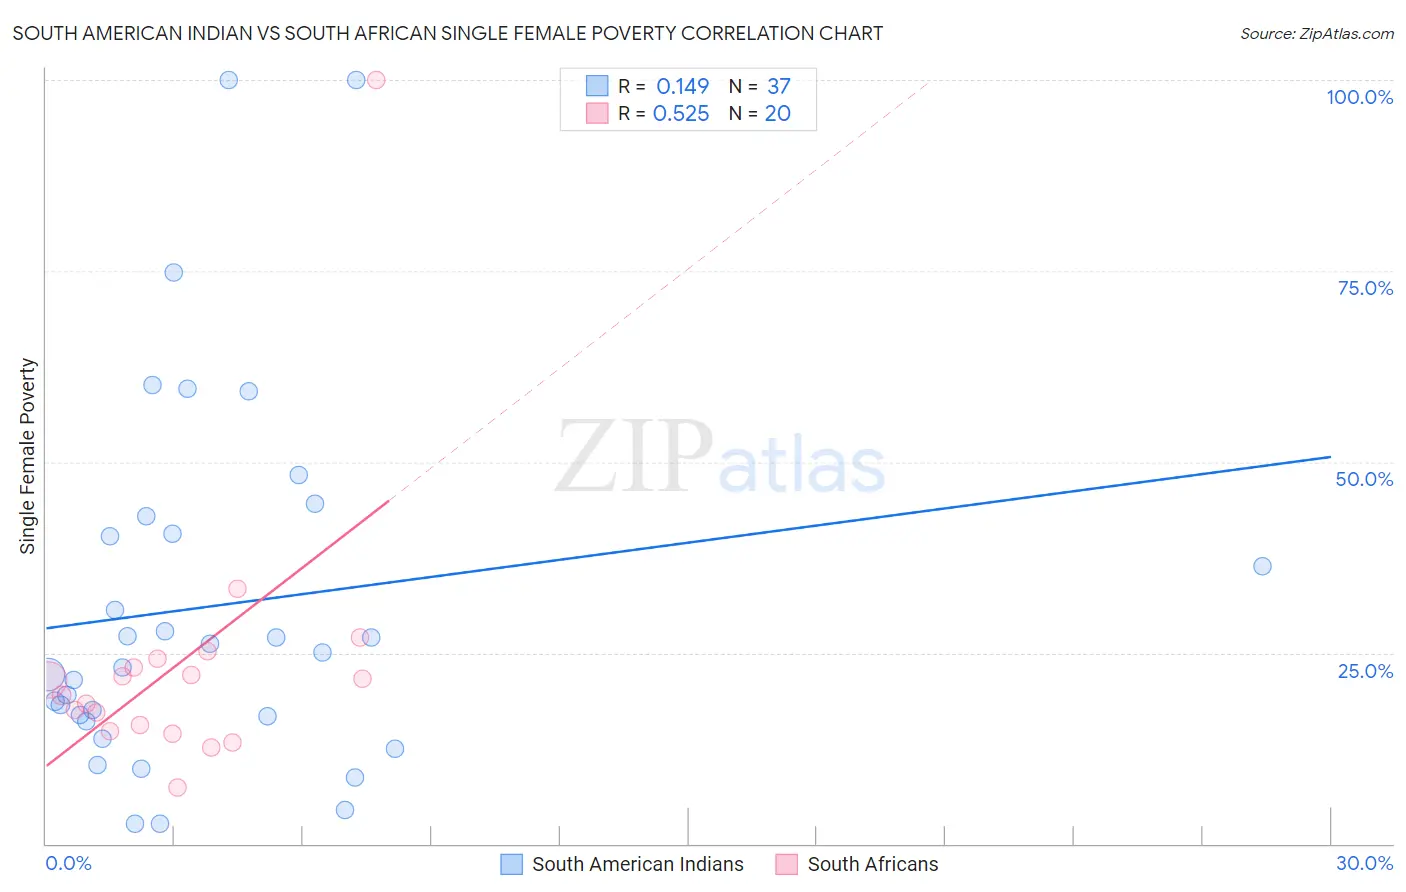 South American Indian vs South African Single Female Poverty